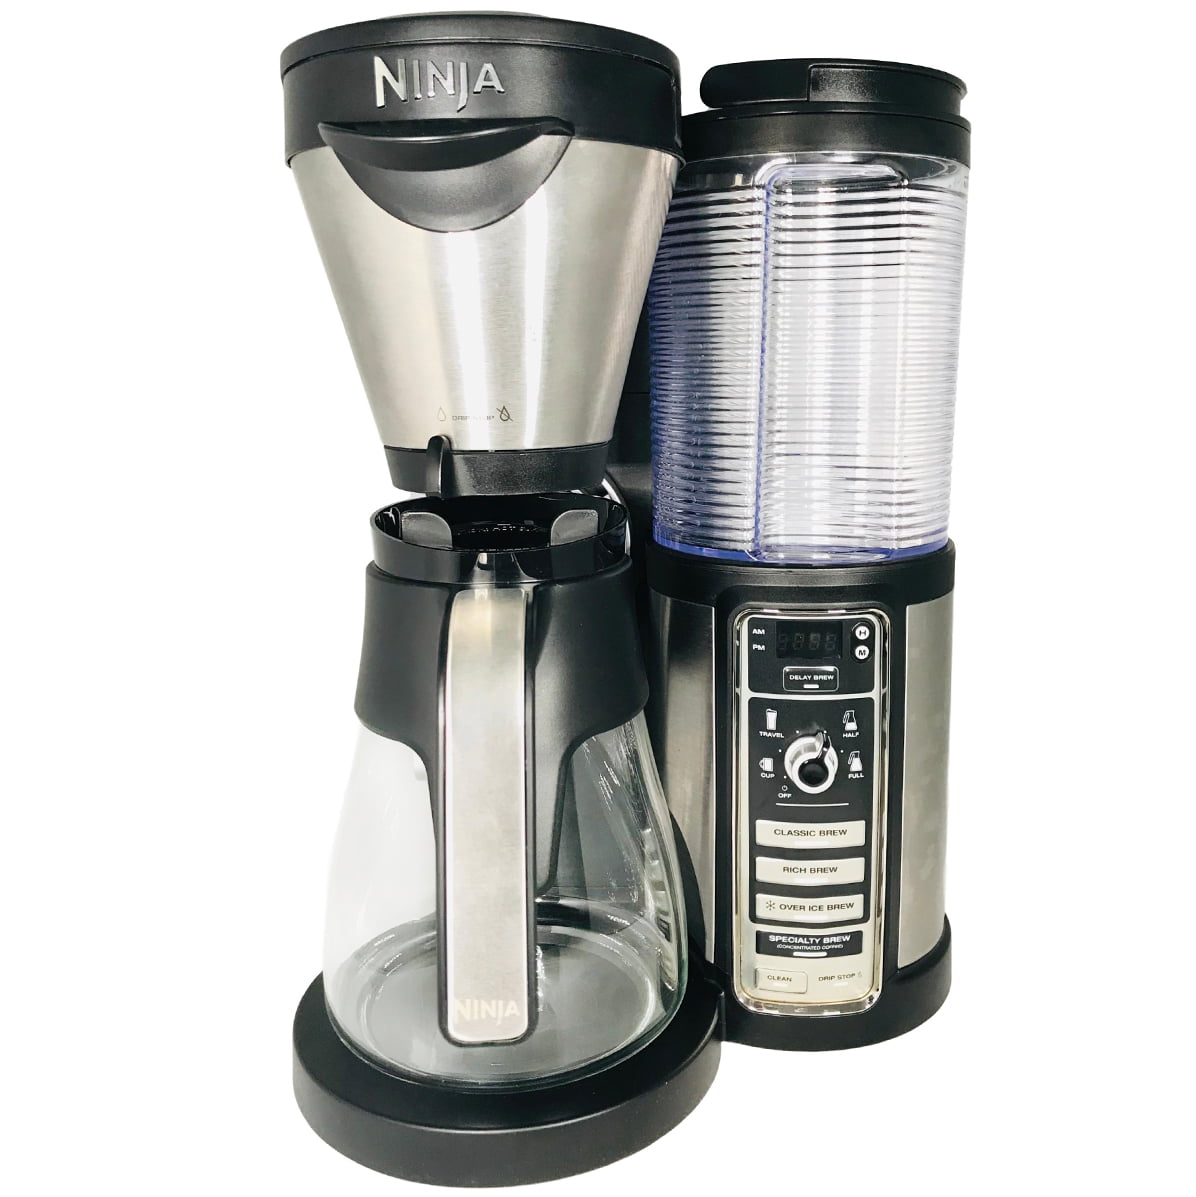 Restored Ninja Coffee Maker for Hot/Iced Coffee with 4 Brew Sizes,  Programmable AutoiQ, Milk Frother, 43oz Glass Carafe, Tumbler and 100  Recipes CF082 (Refurbished) 